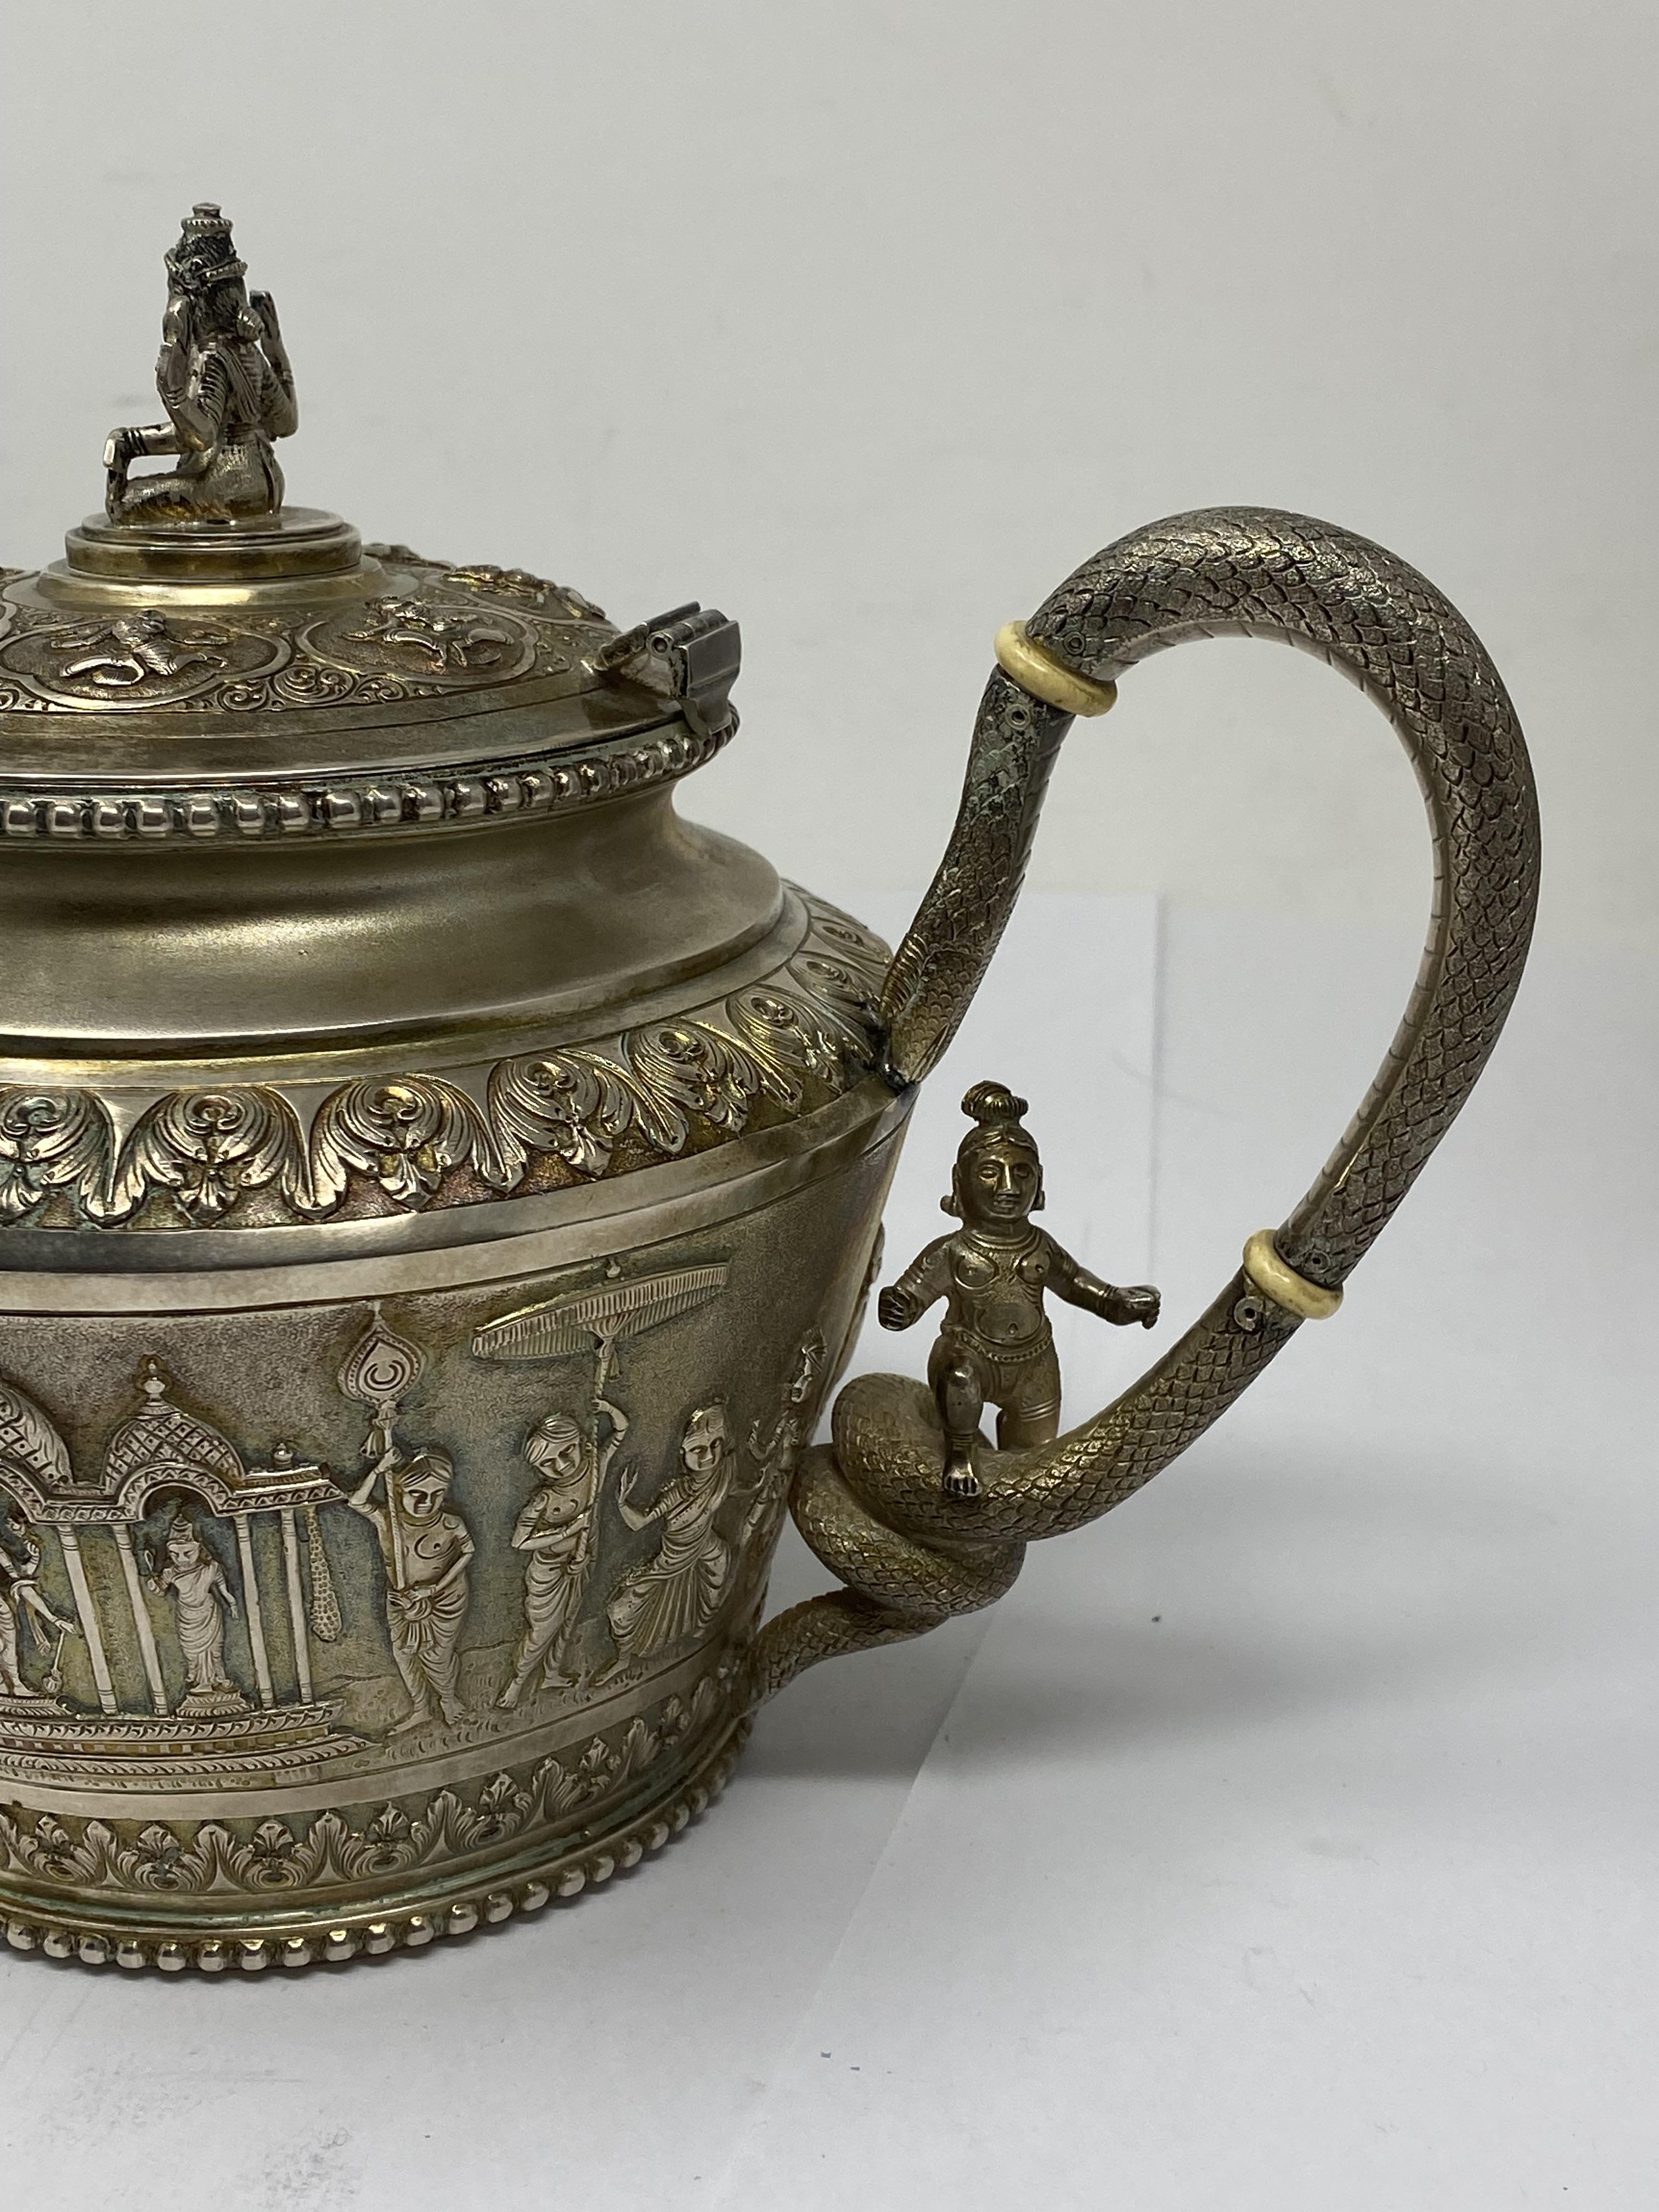 ˜A PARCEL-GILT-SILVER TEA SET, ATTRIBUTED TO P. ORR AND SONS, MADRAS (CHENNAI), INDIA, CIRCA 1905-10 - Image 11 of 18